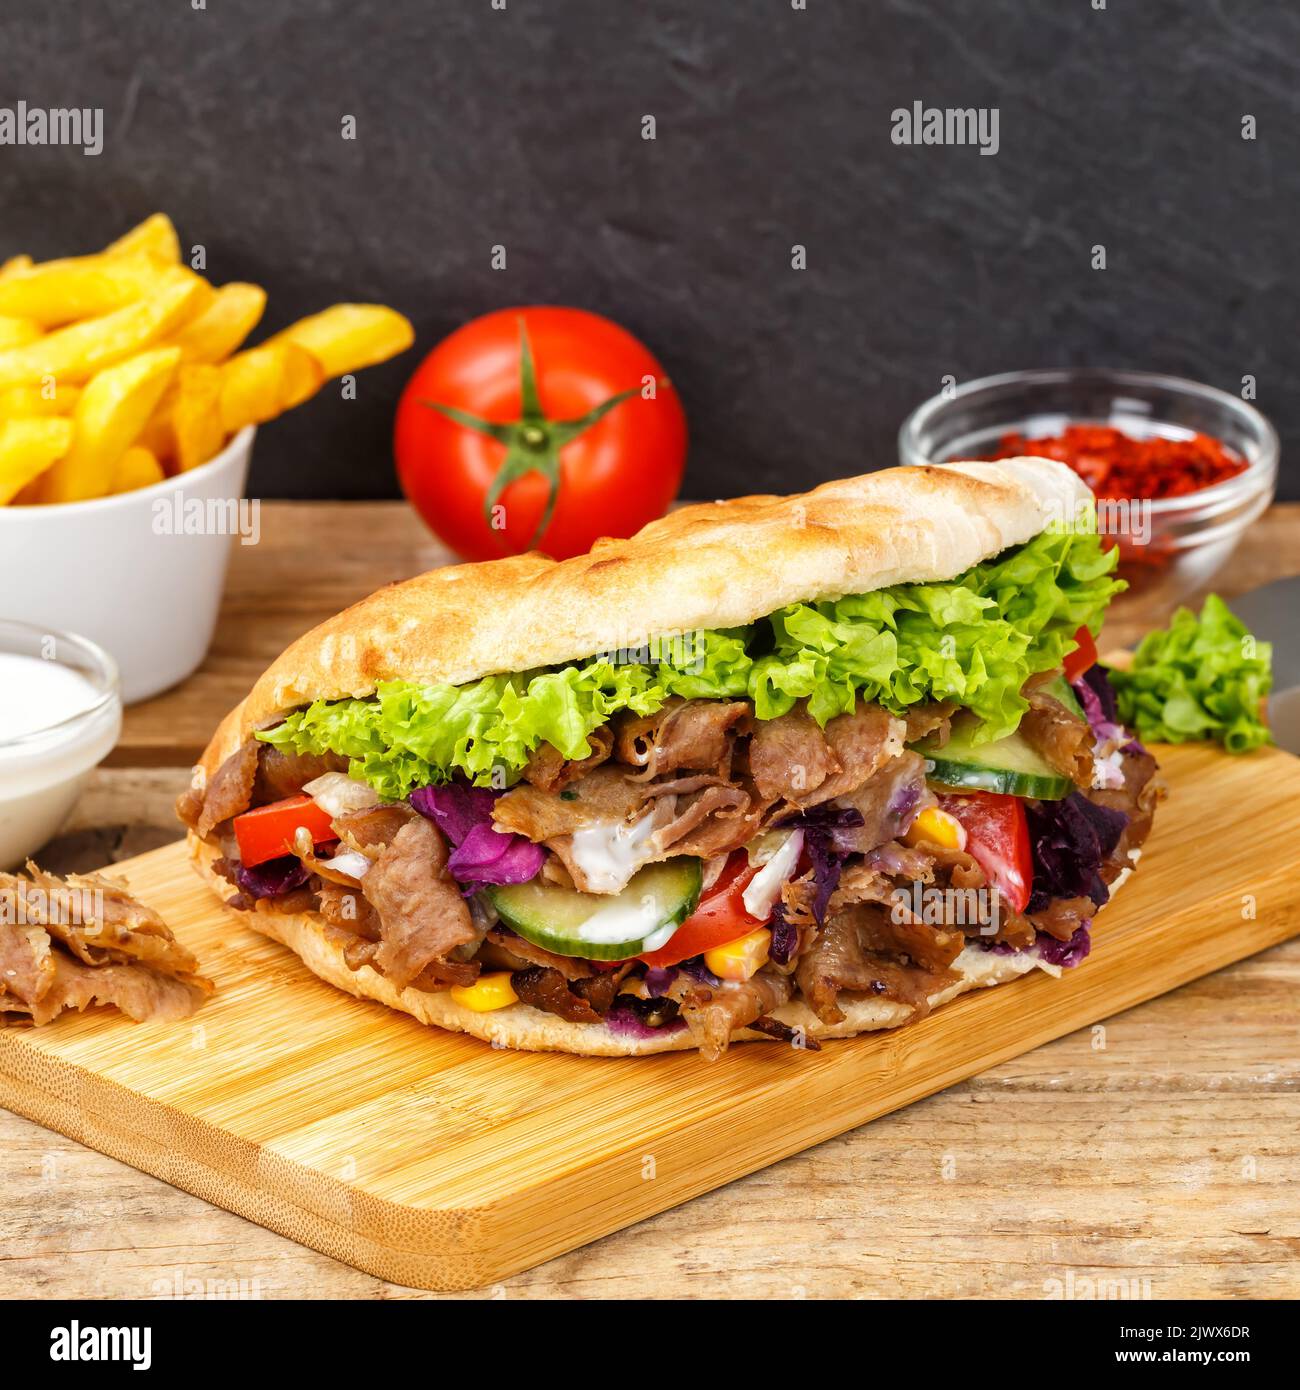 Döner Kebab Doner Kebap fast food meal in flatbread with fries on a wooden board square board Stock Photo